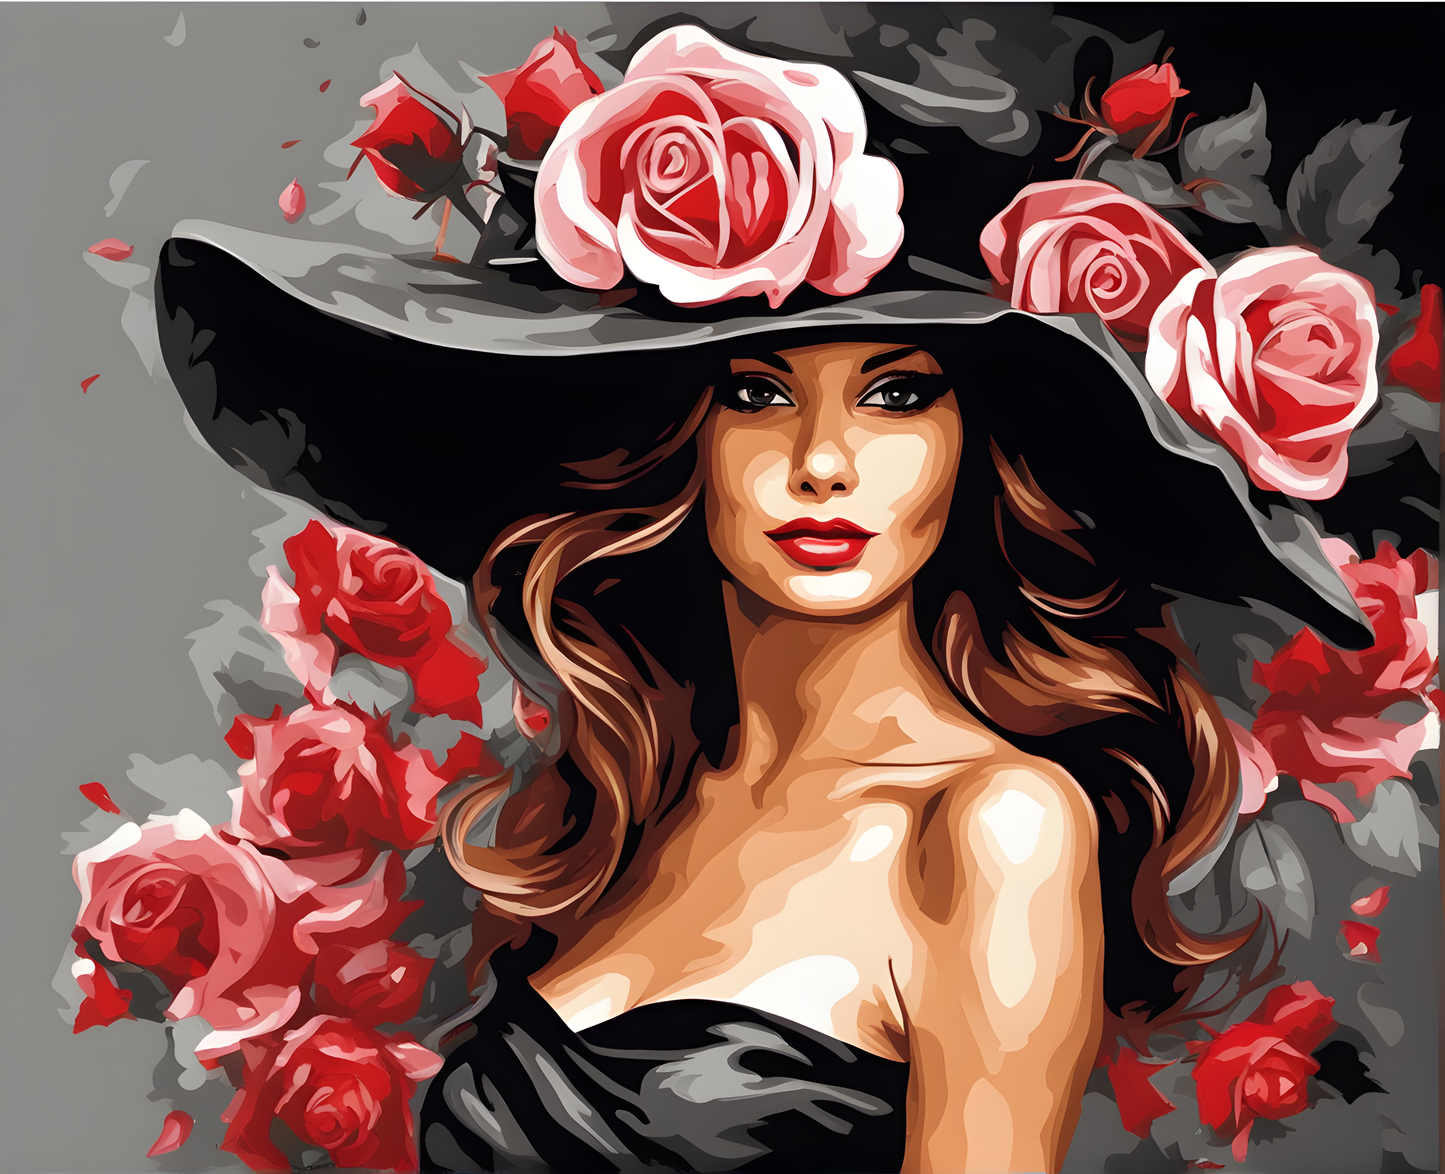 Roses Lady with a Black Hat (1) - Van-Go Paint-By-Number Kit